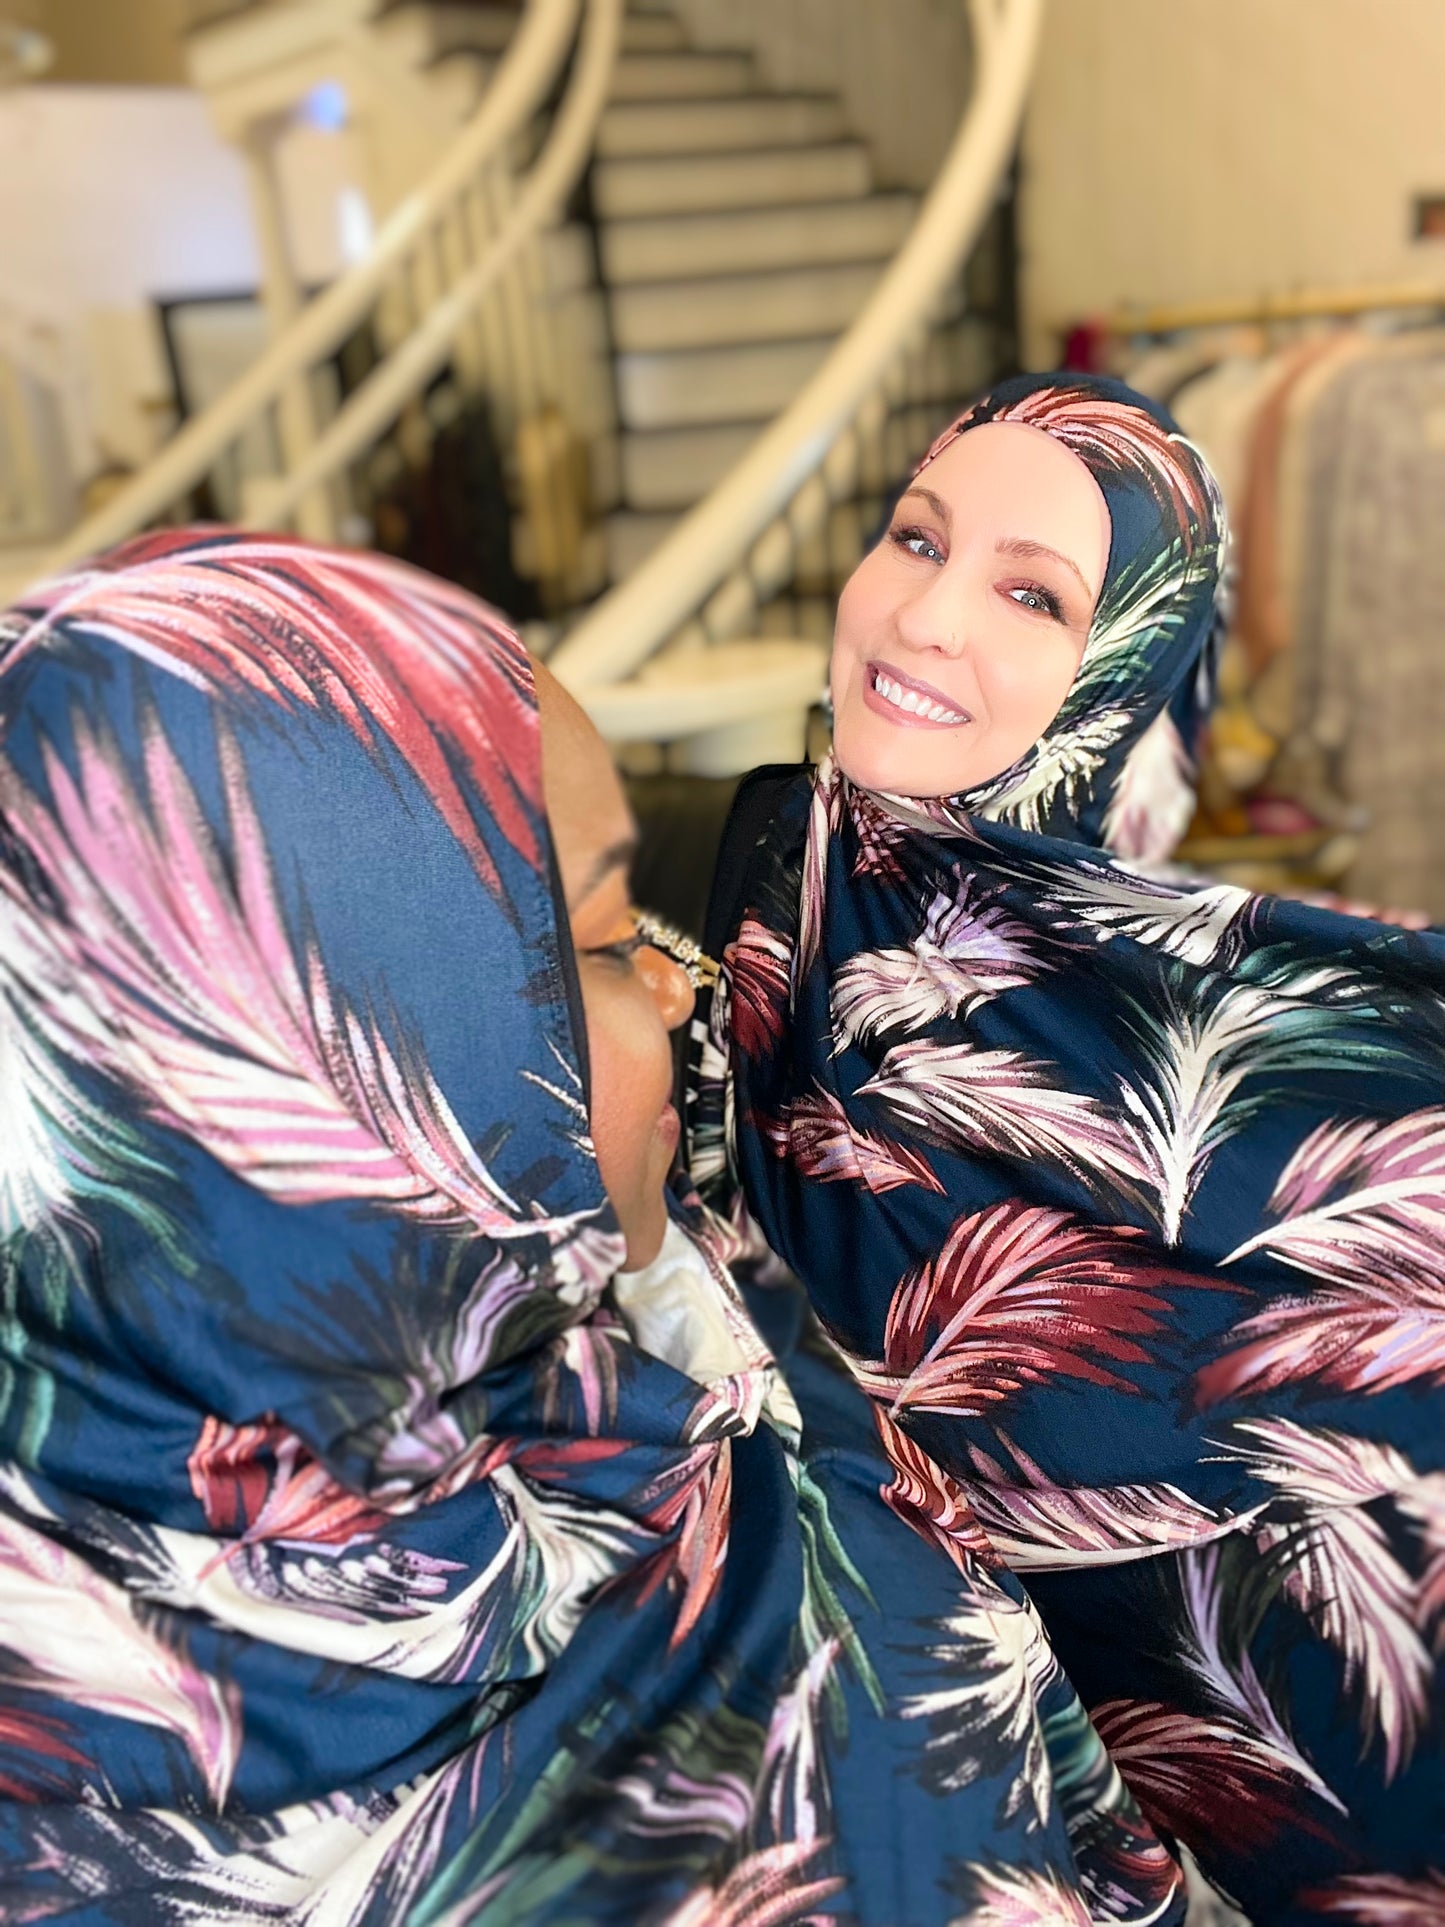 Printed Jersey Hijab: Fair Weather Friends